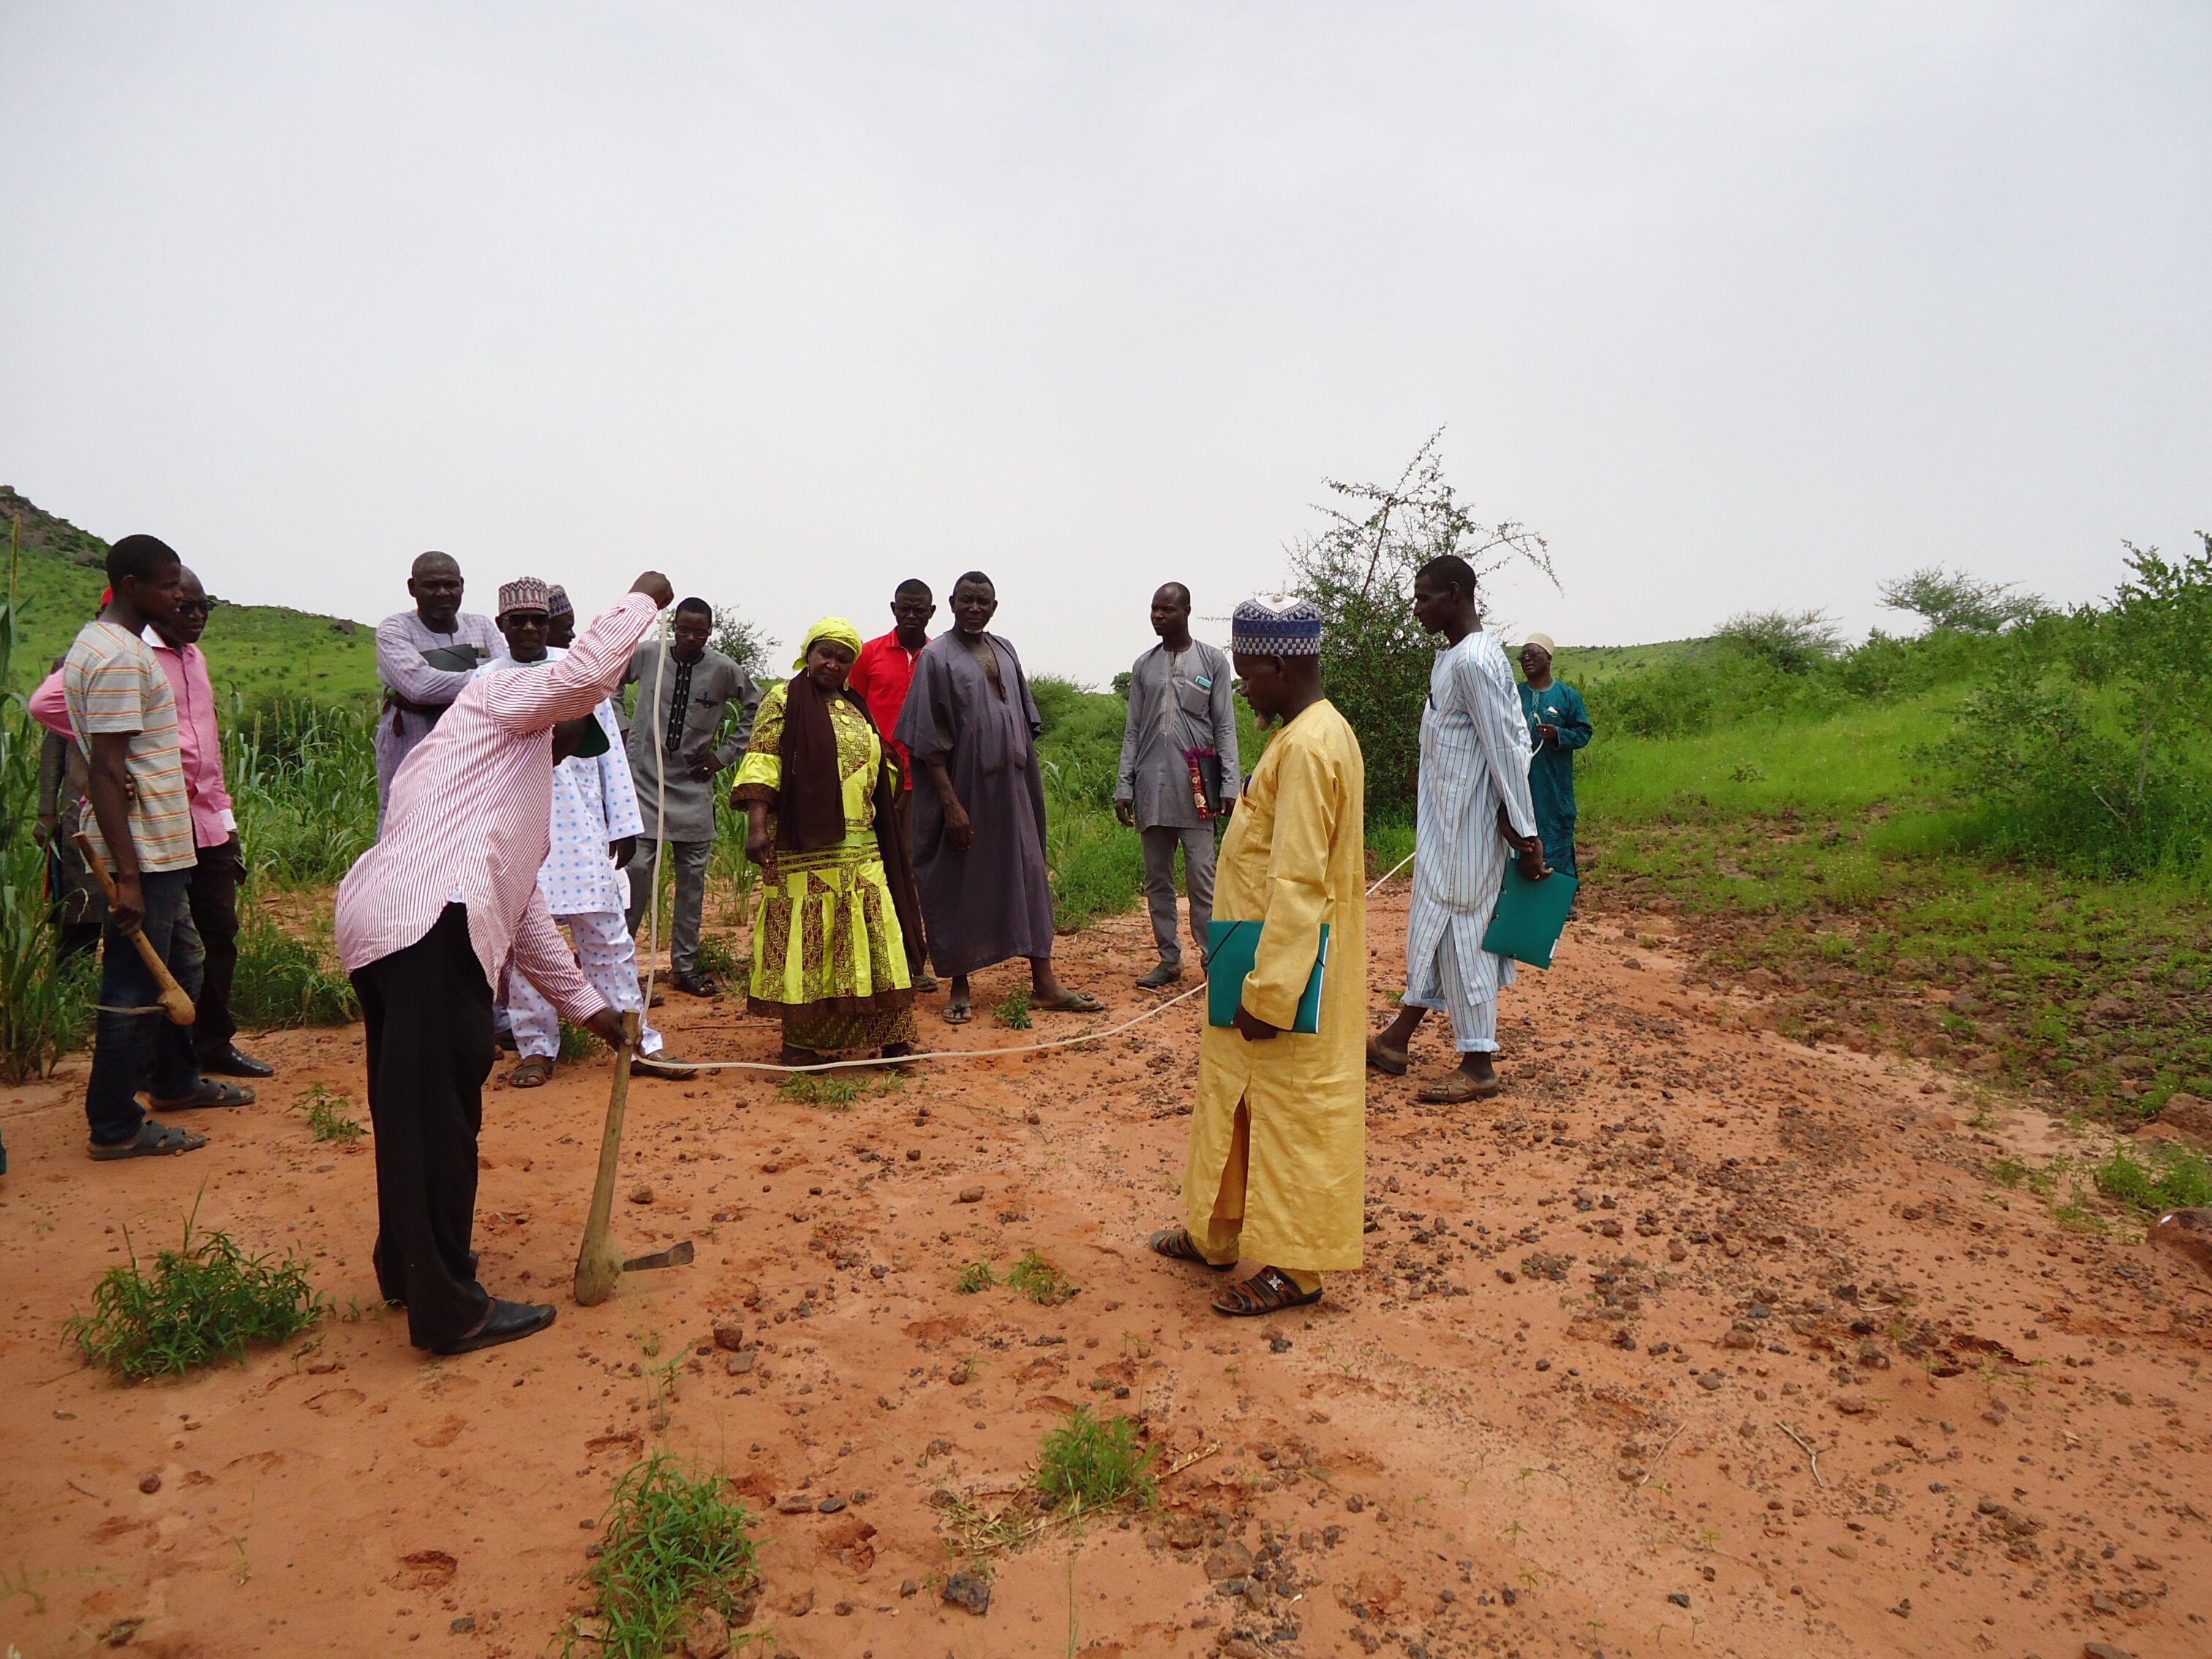 Farmers in Niger using sustainable agricultural techniques